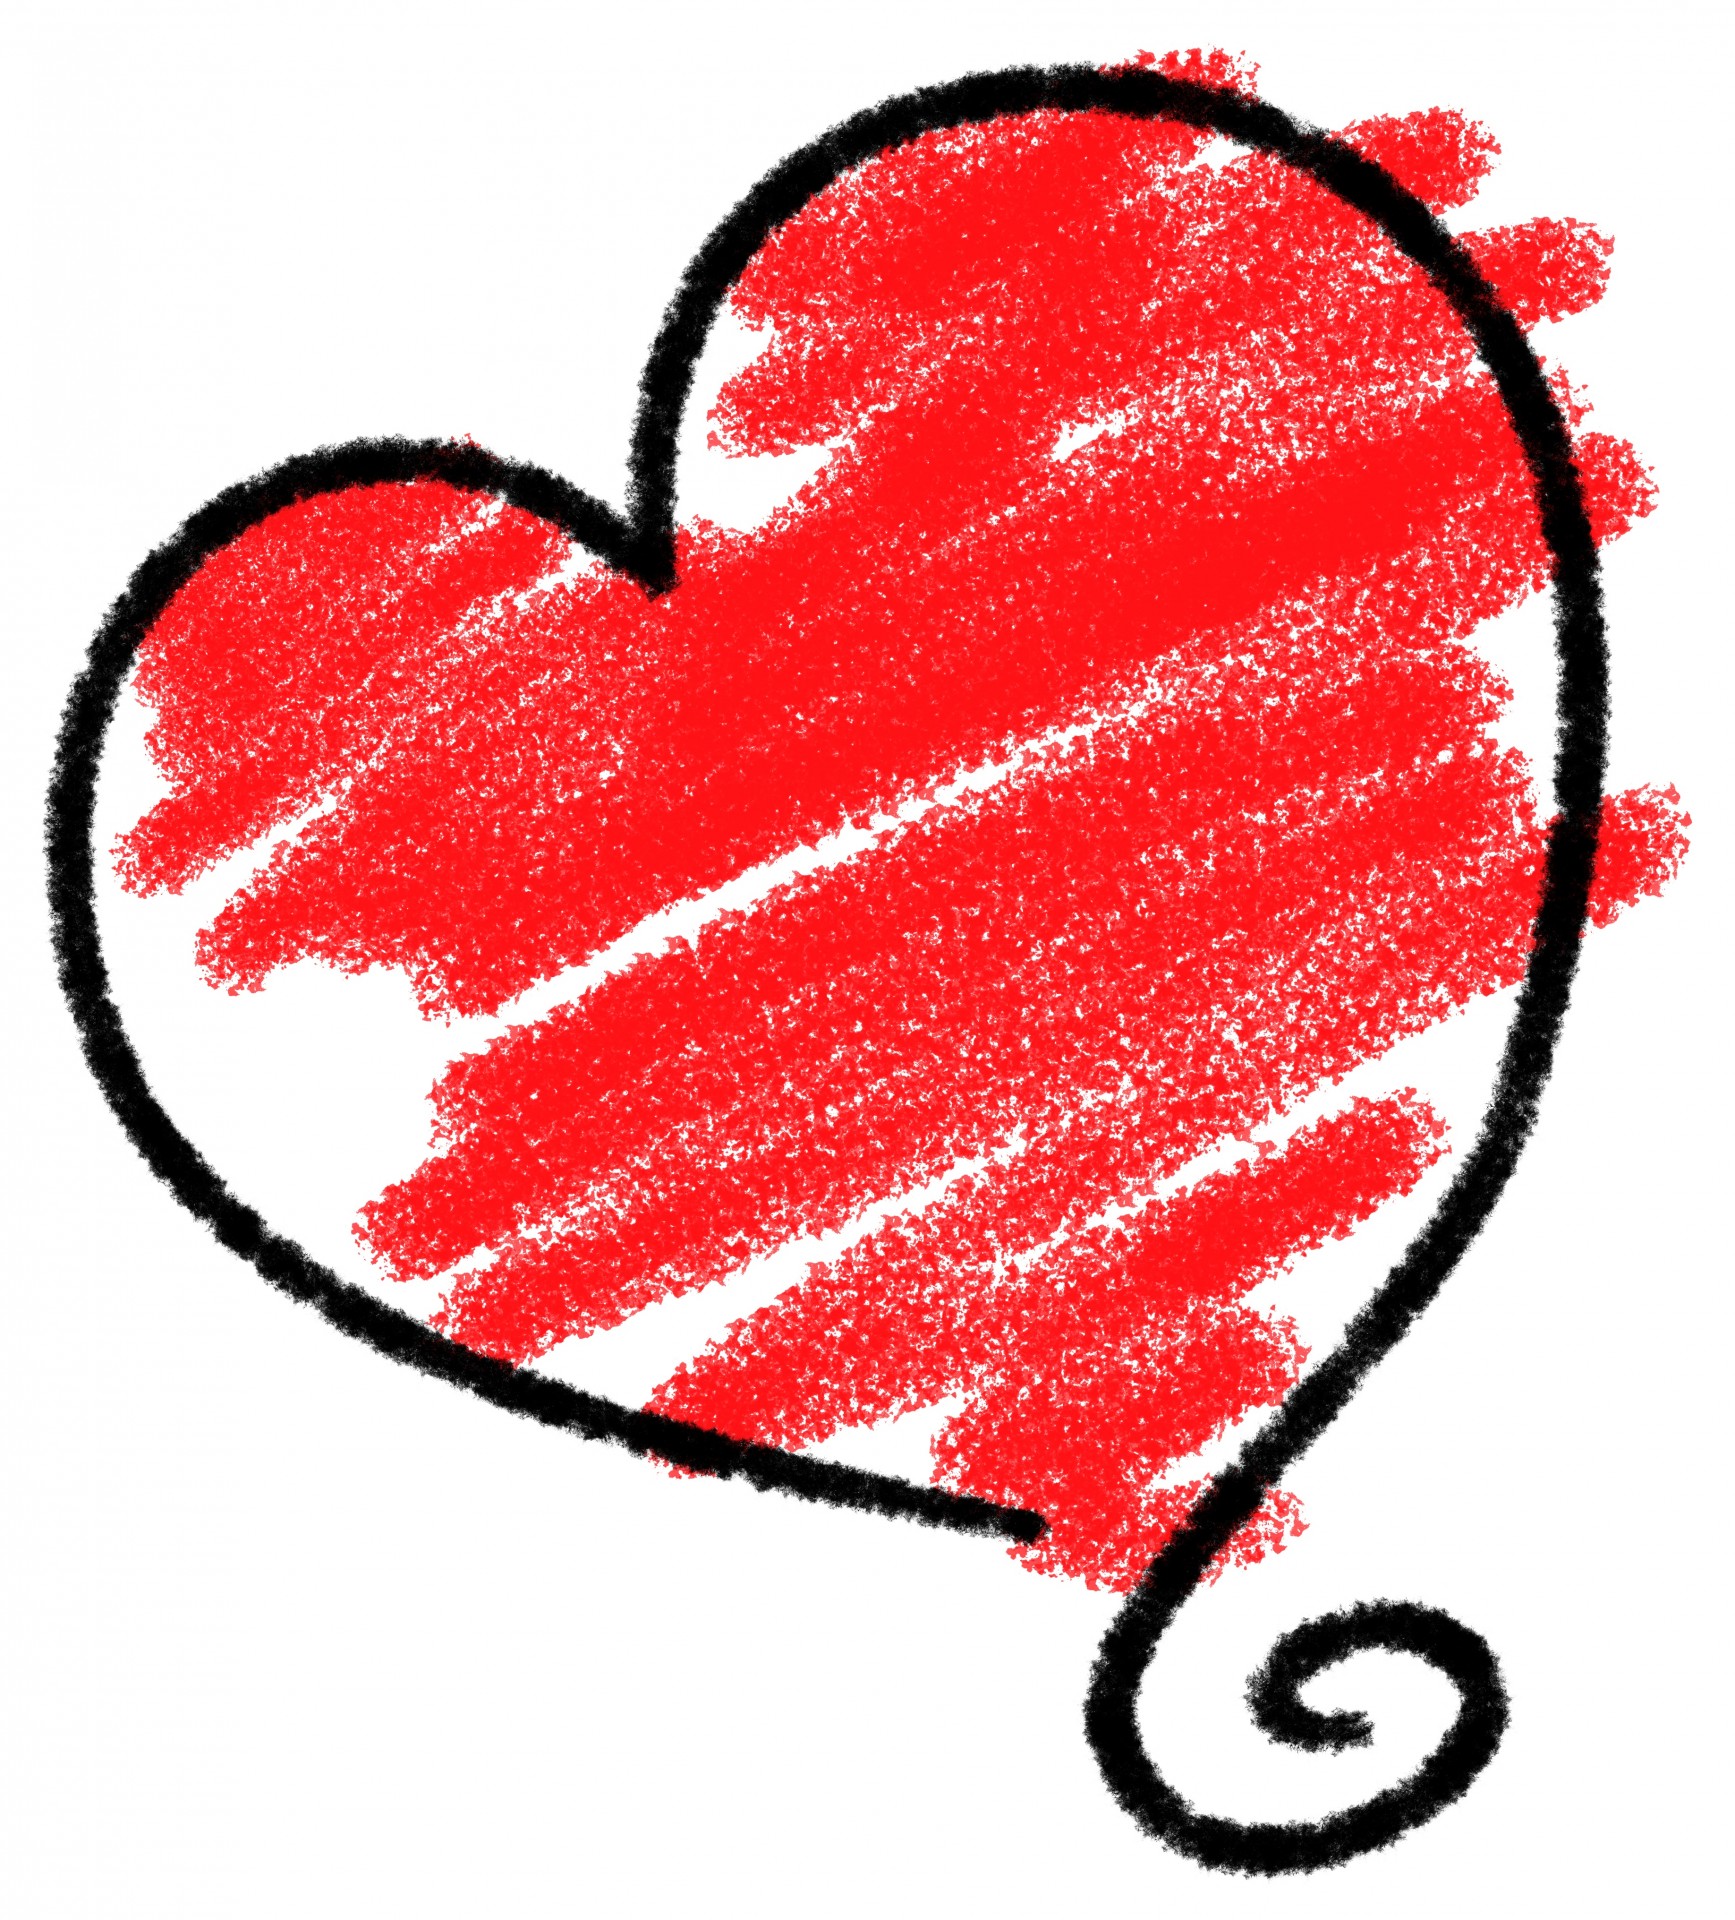 Digitally created sketched red heart shape.